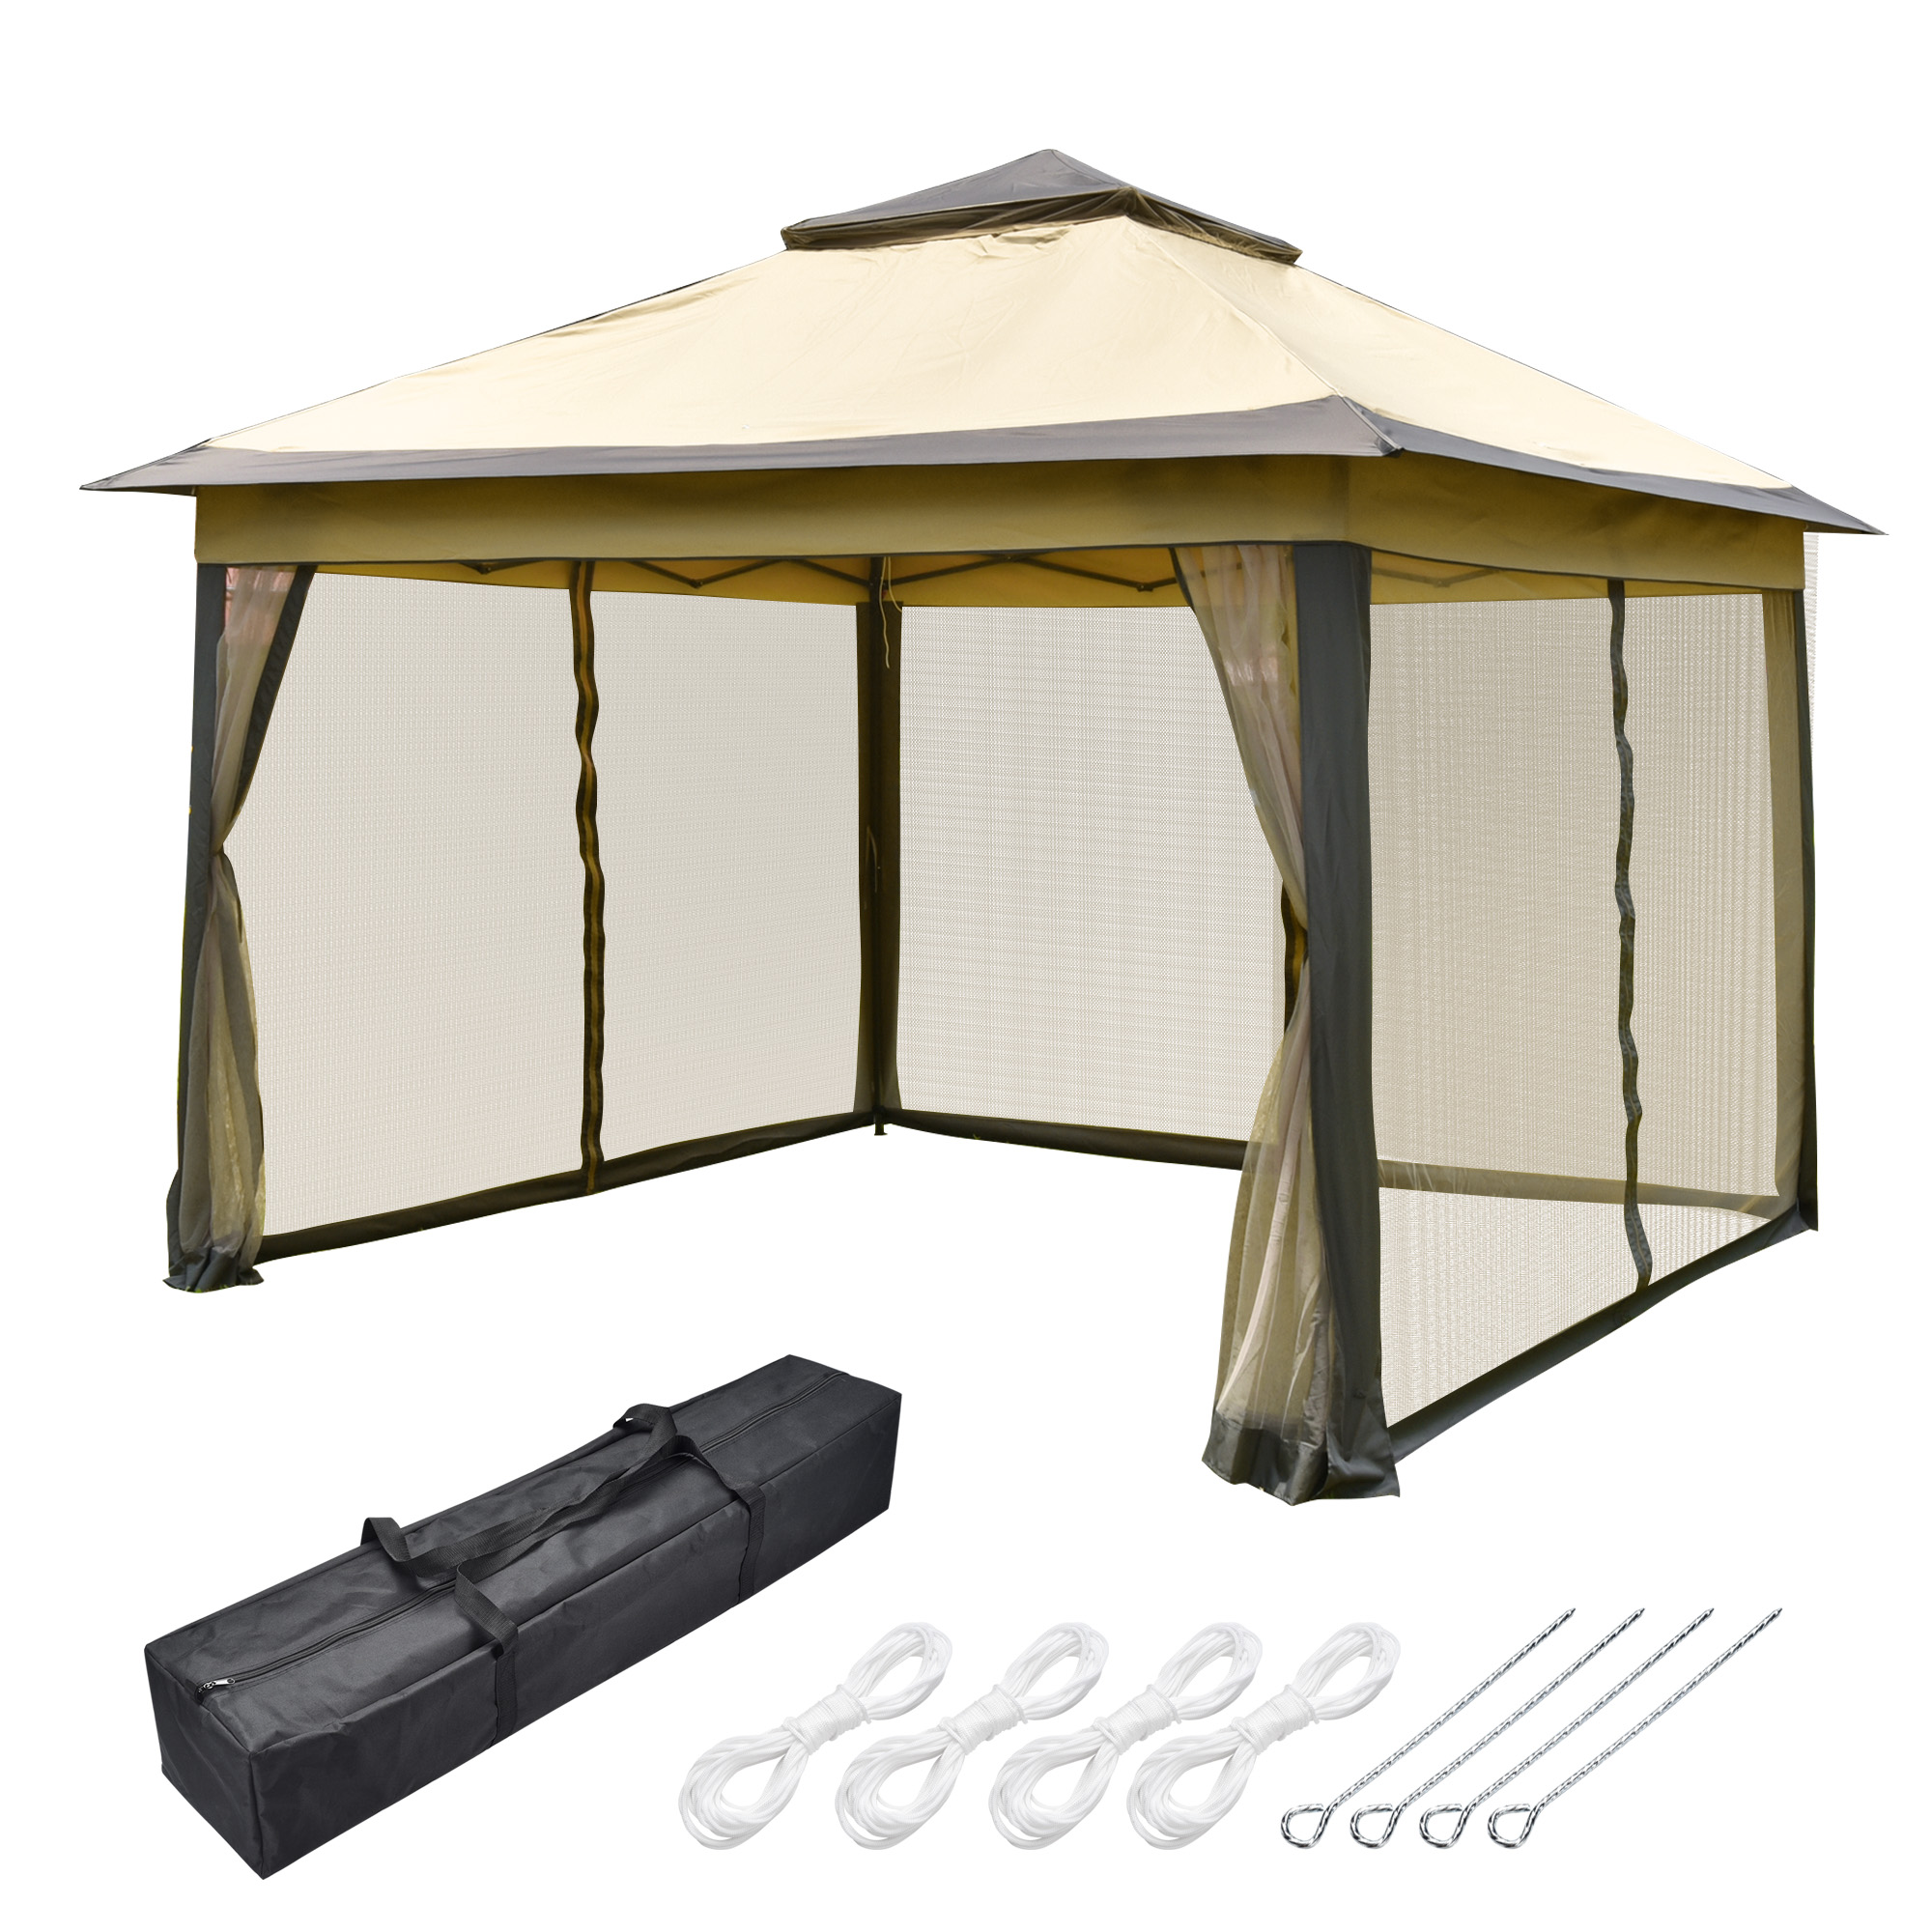 Yescom 11x11ft Pop-Up Gazebo Tent with Netting Carry Bag Carry Bag Party Home Backyard